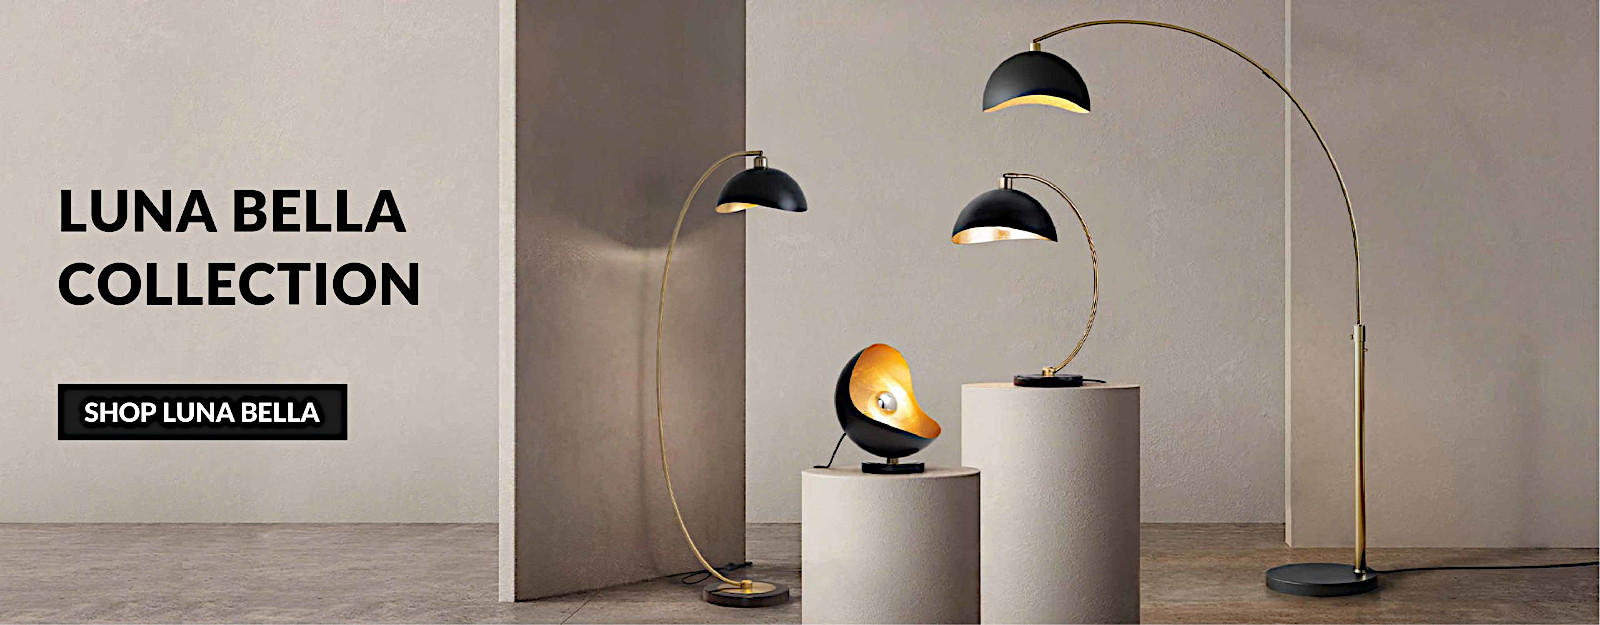 Luna Bella lighting collection low-priced